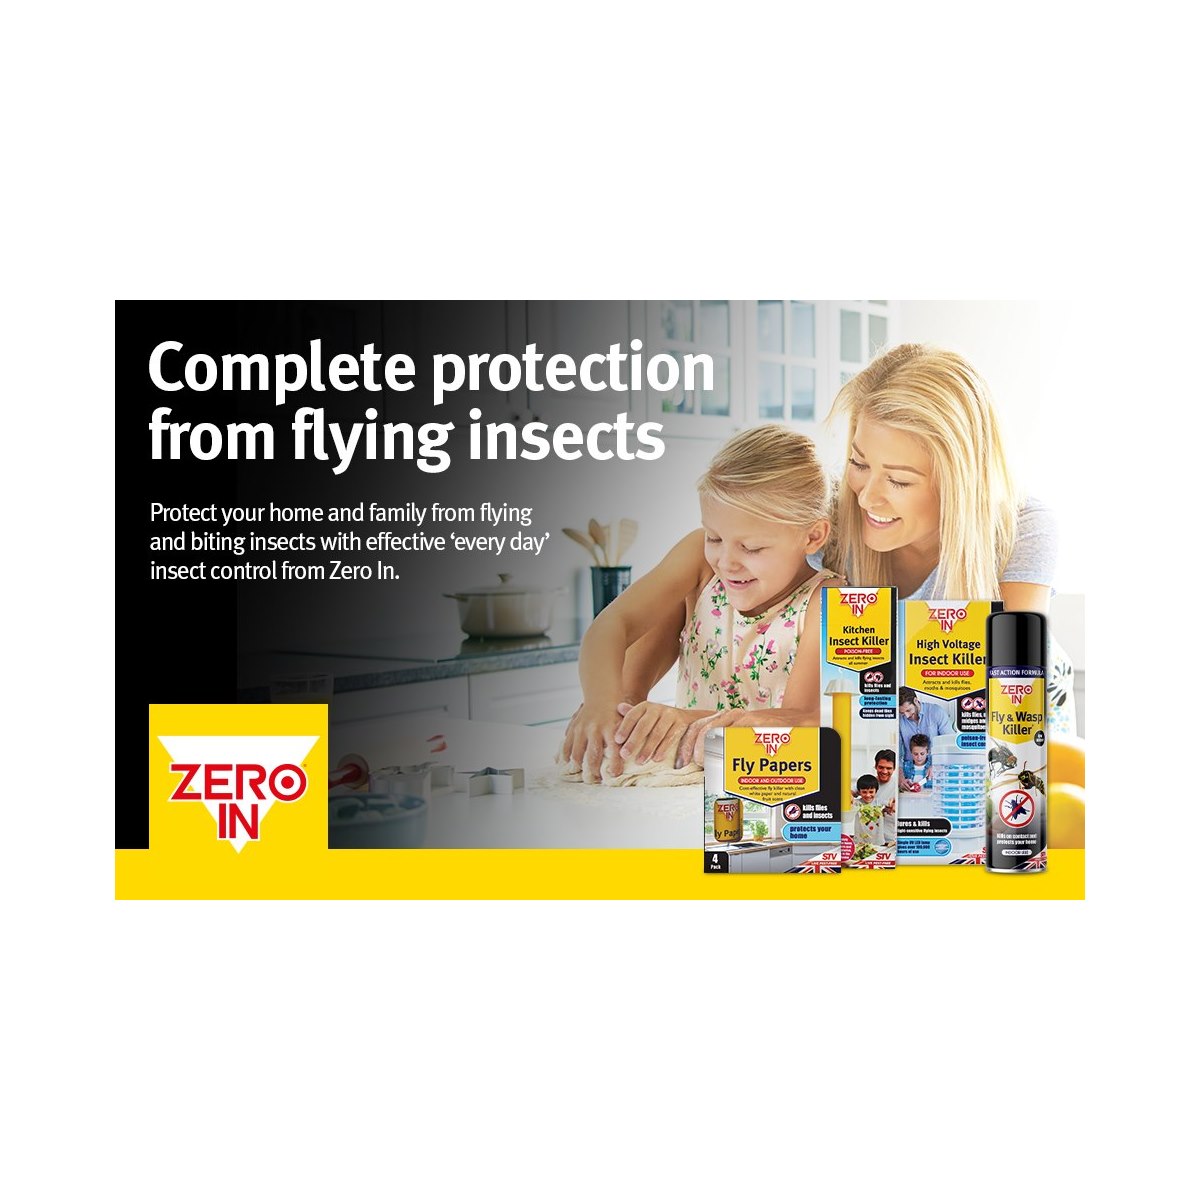 Where to buy Zero In Insect Killers